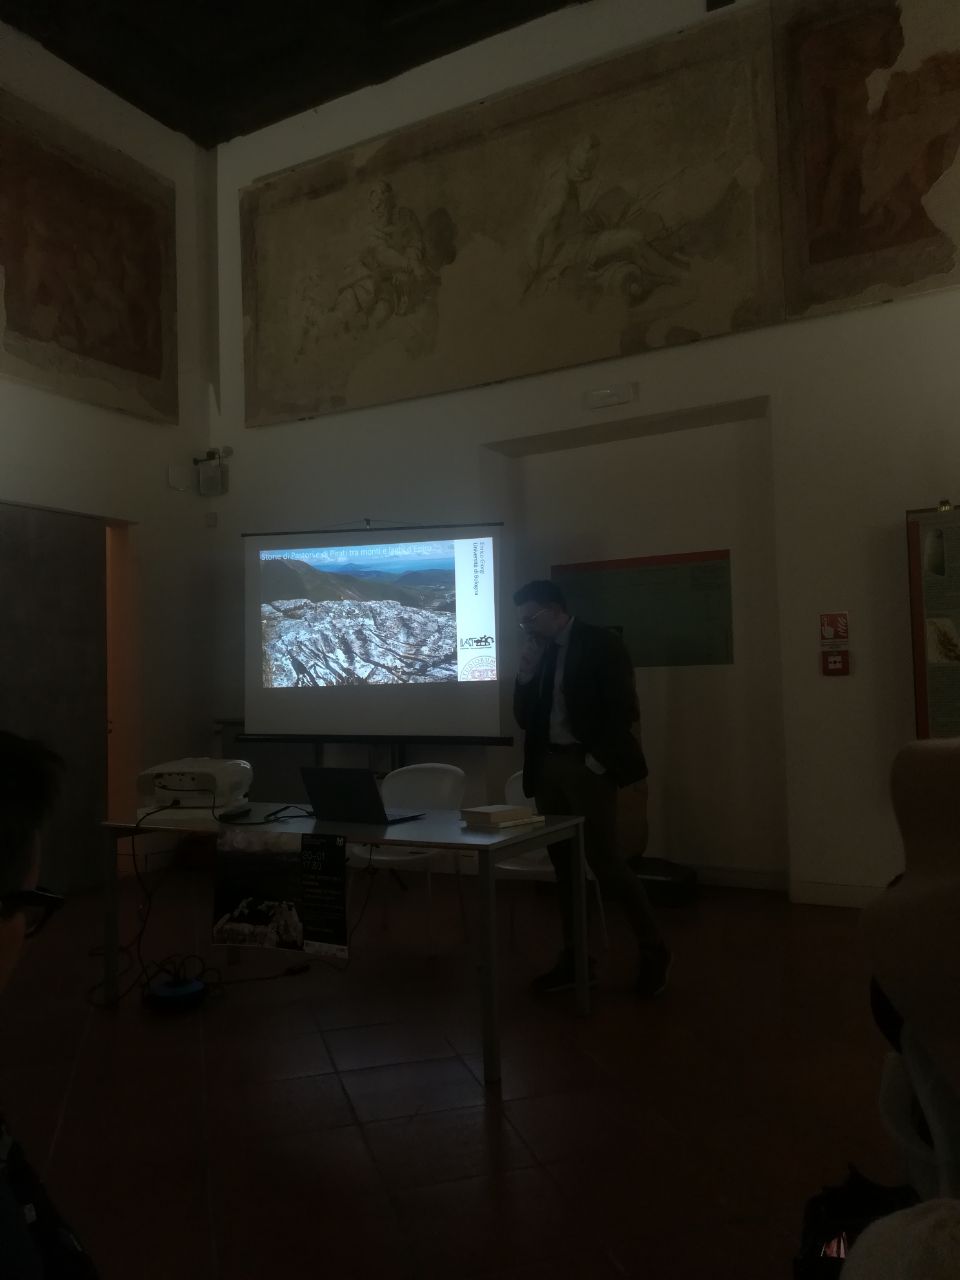 Conference in the Archaeological Museum of Ascoli Piceno